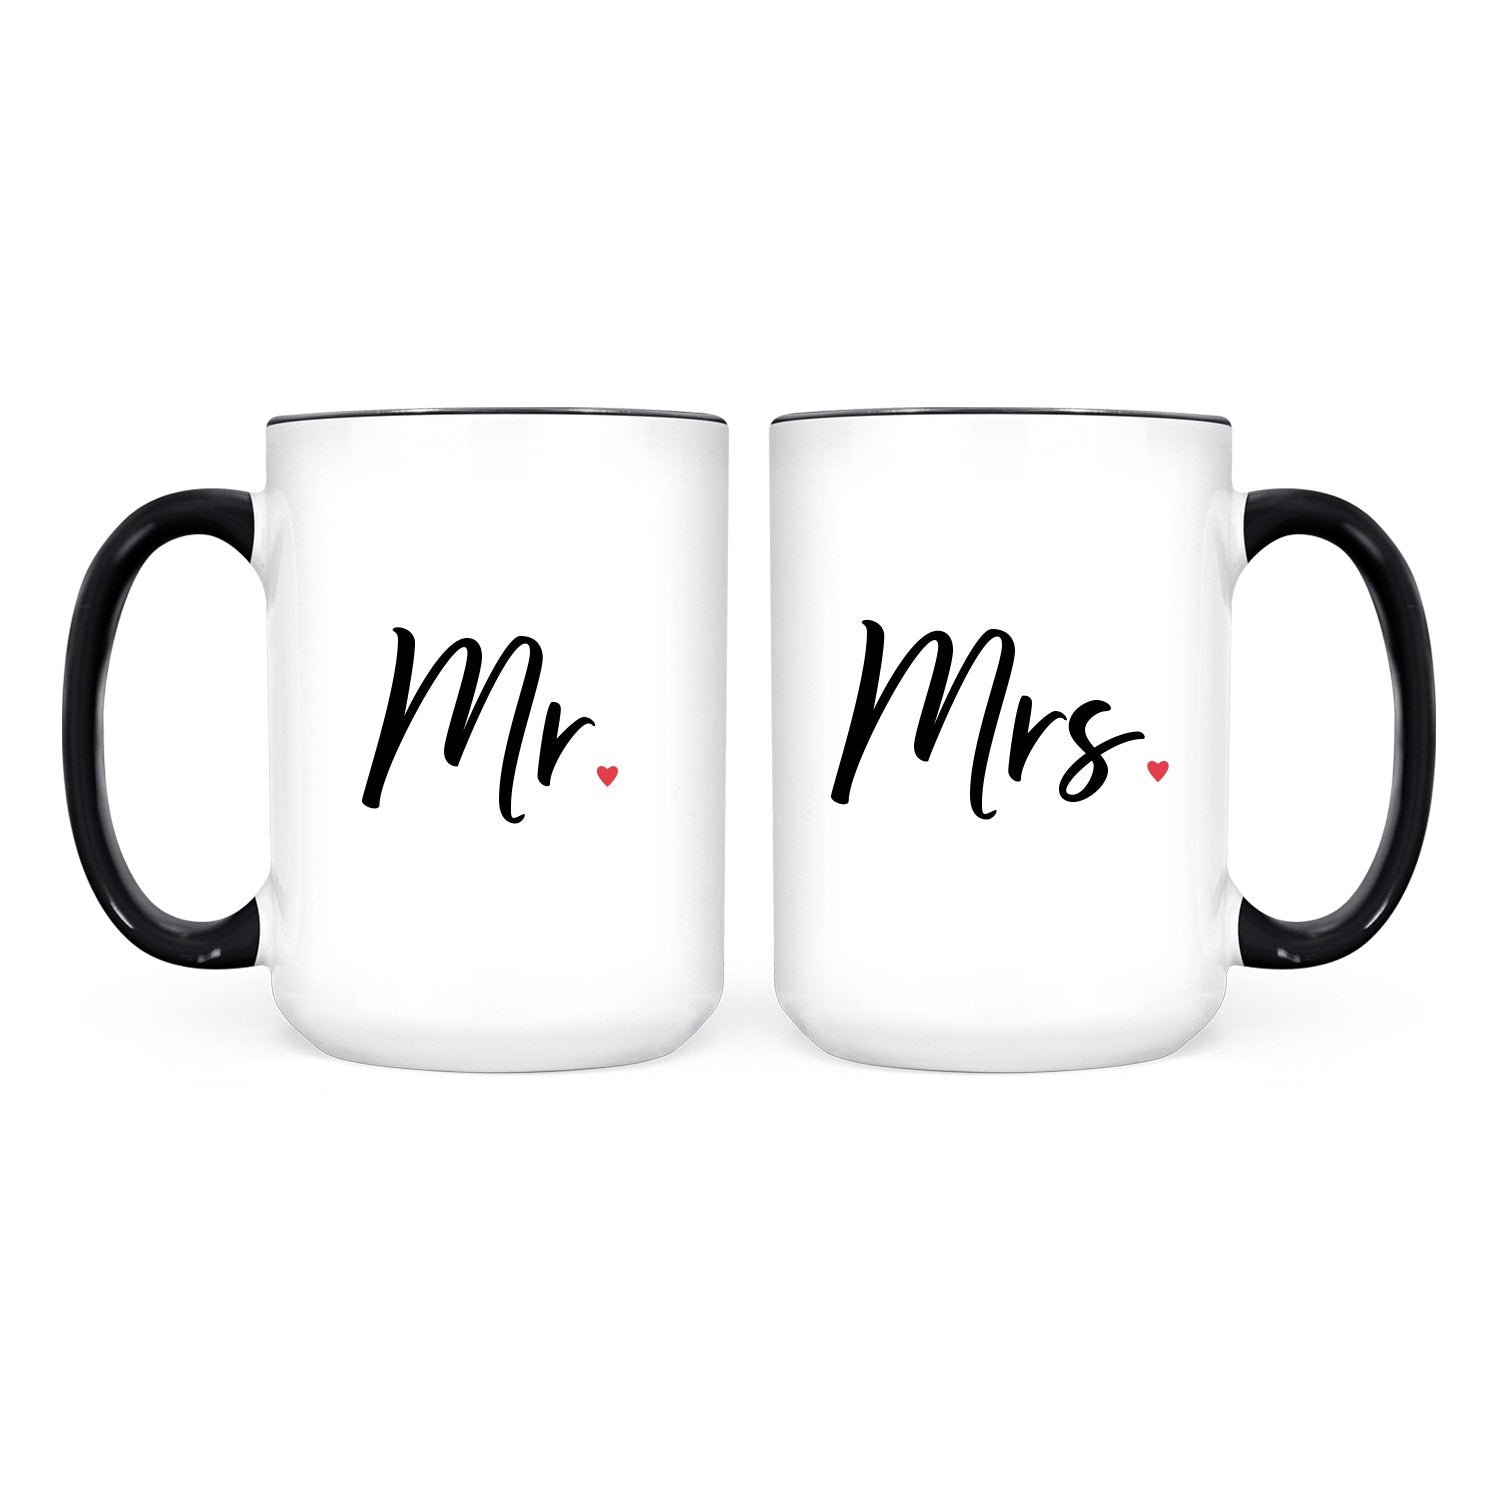 Mr and Mrs mugs - Pretty by Her